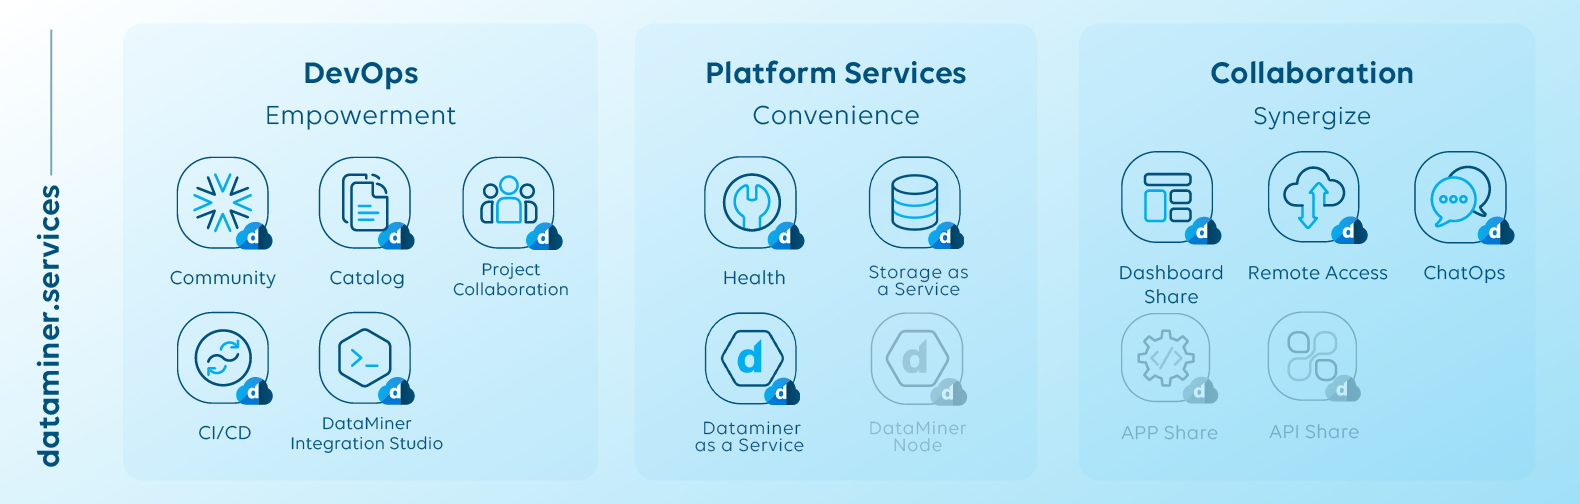 dataminer.services.categories